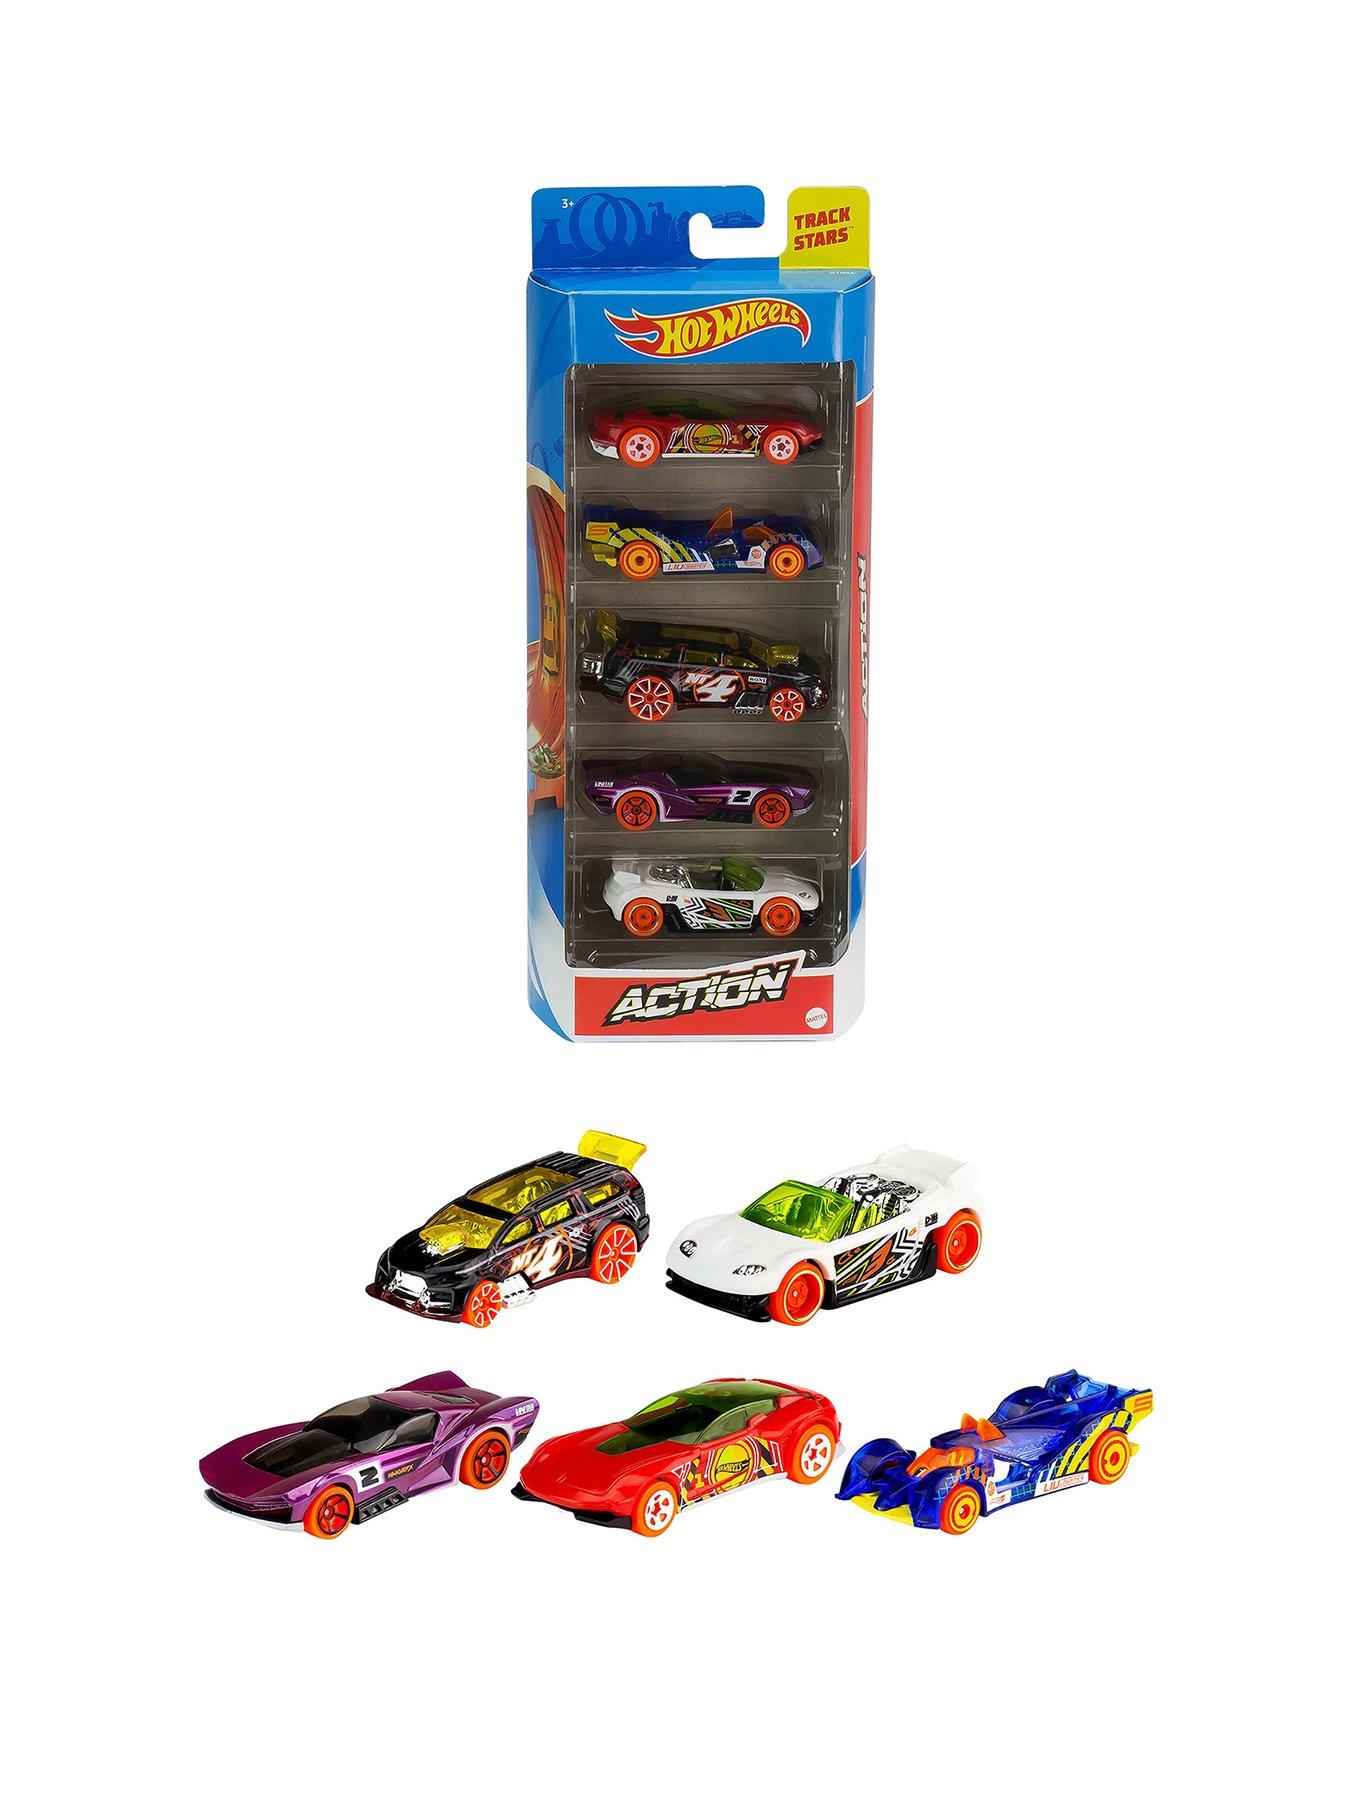 HOT WHEELS ULTIMATE GARAGE - The Toy Insider